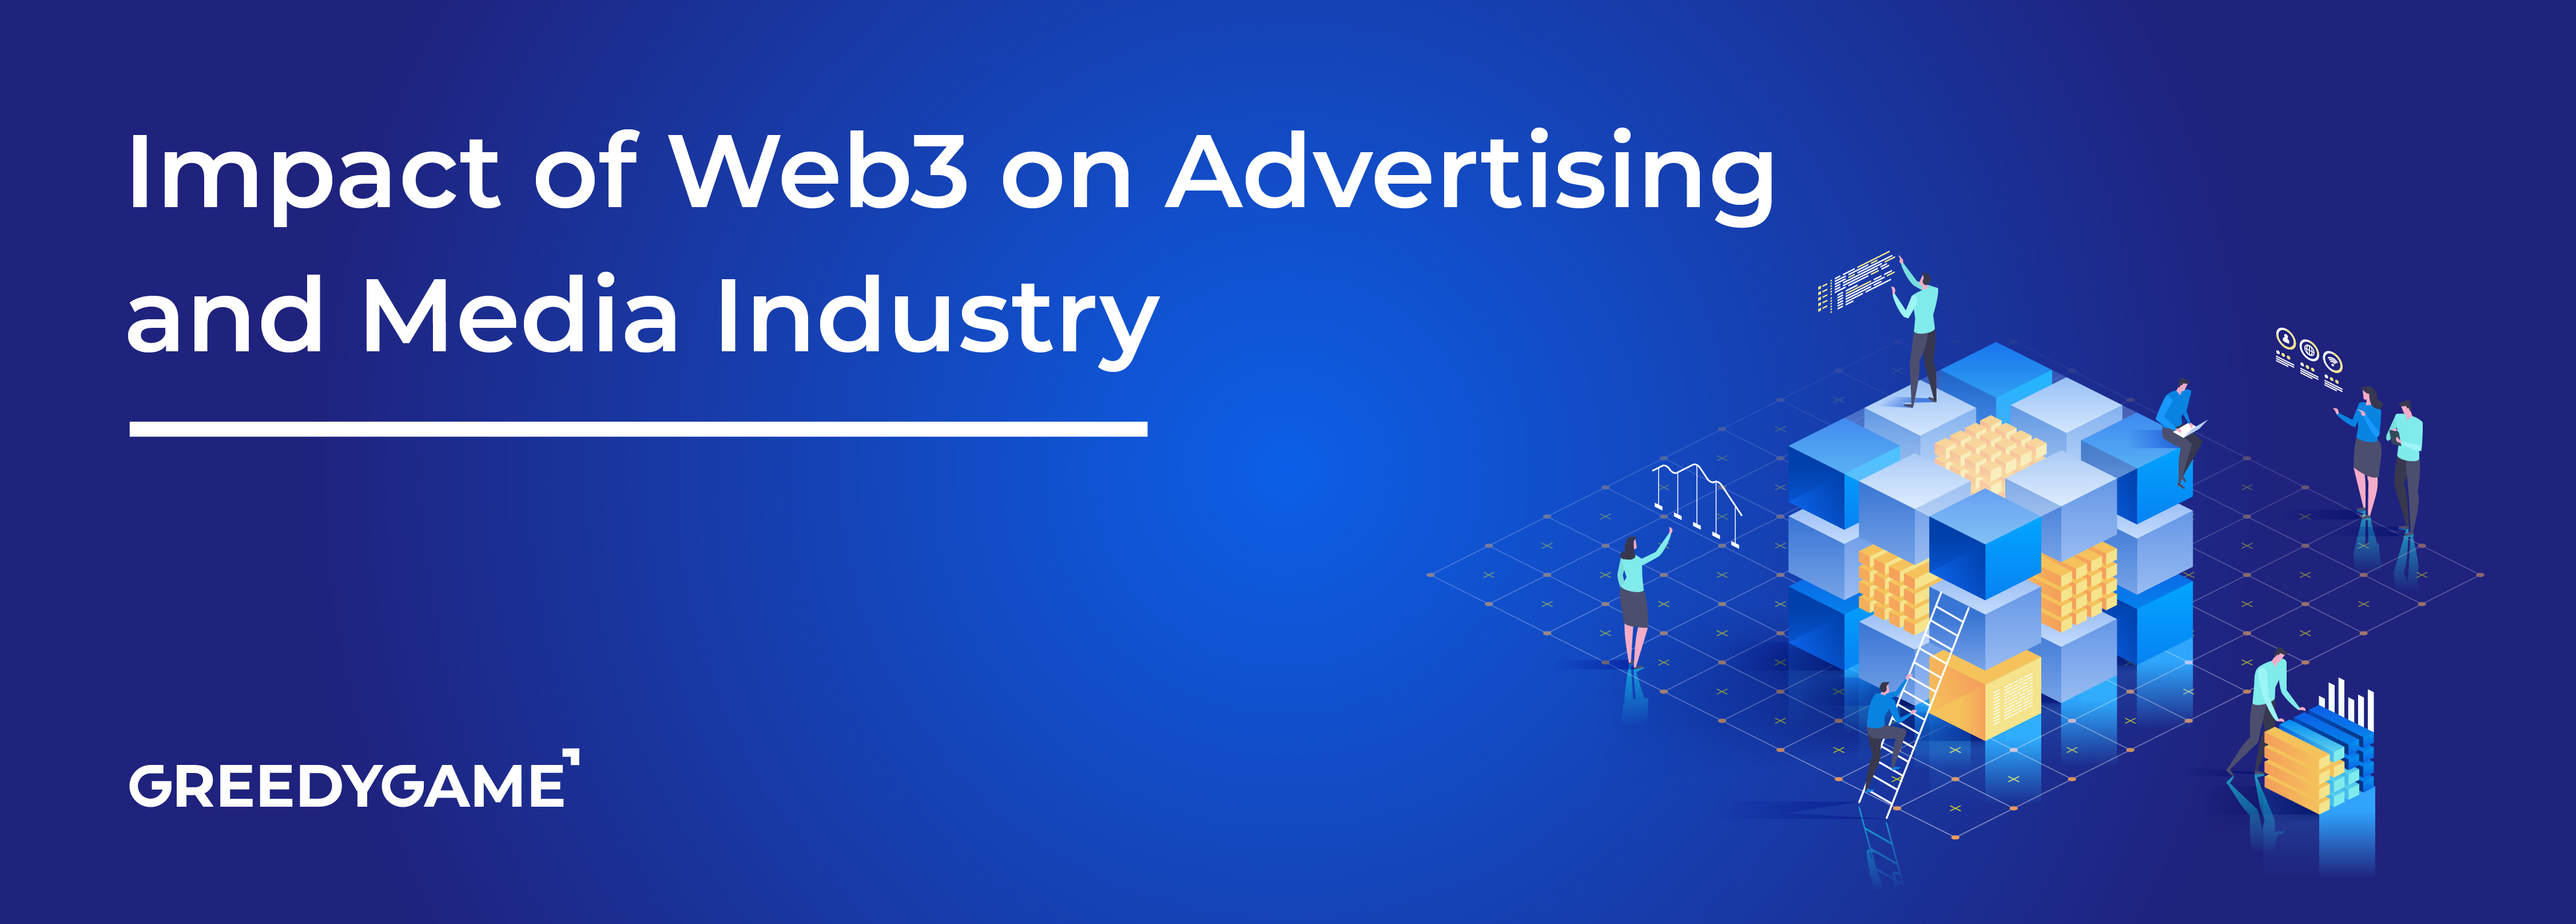 Impact of Web3 on Advertising and Media Industry